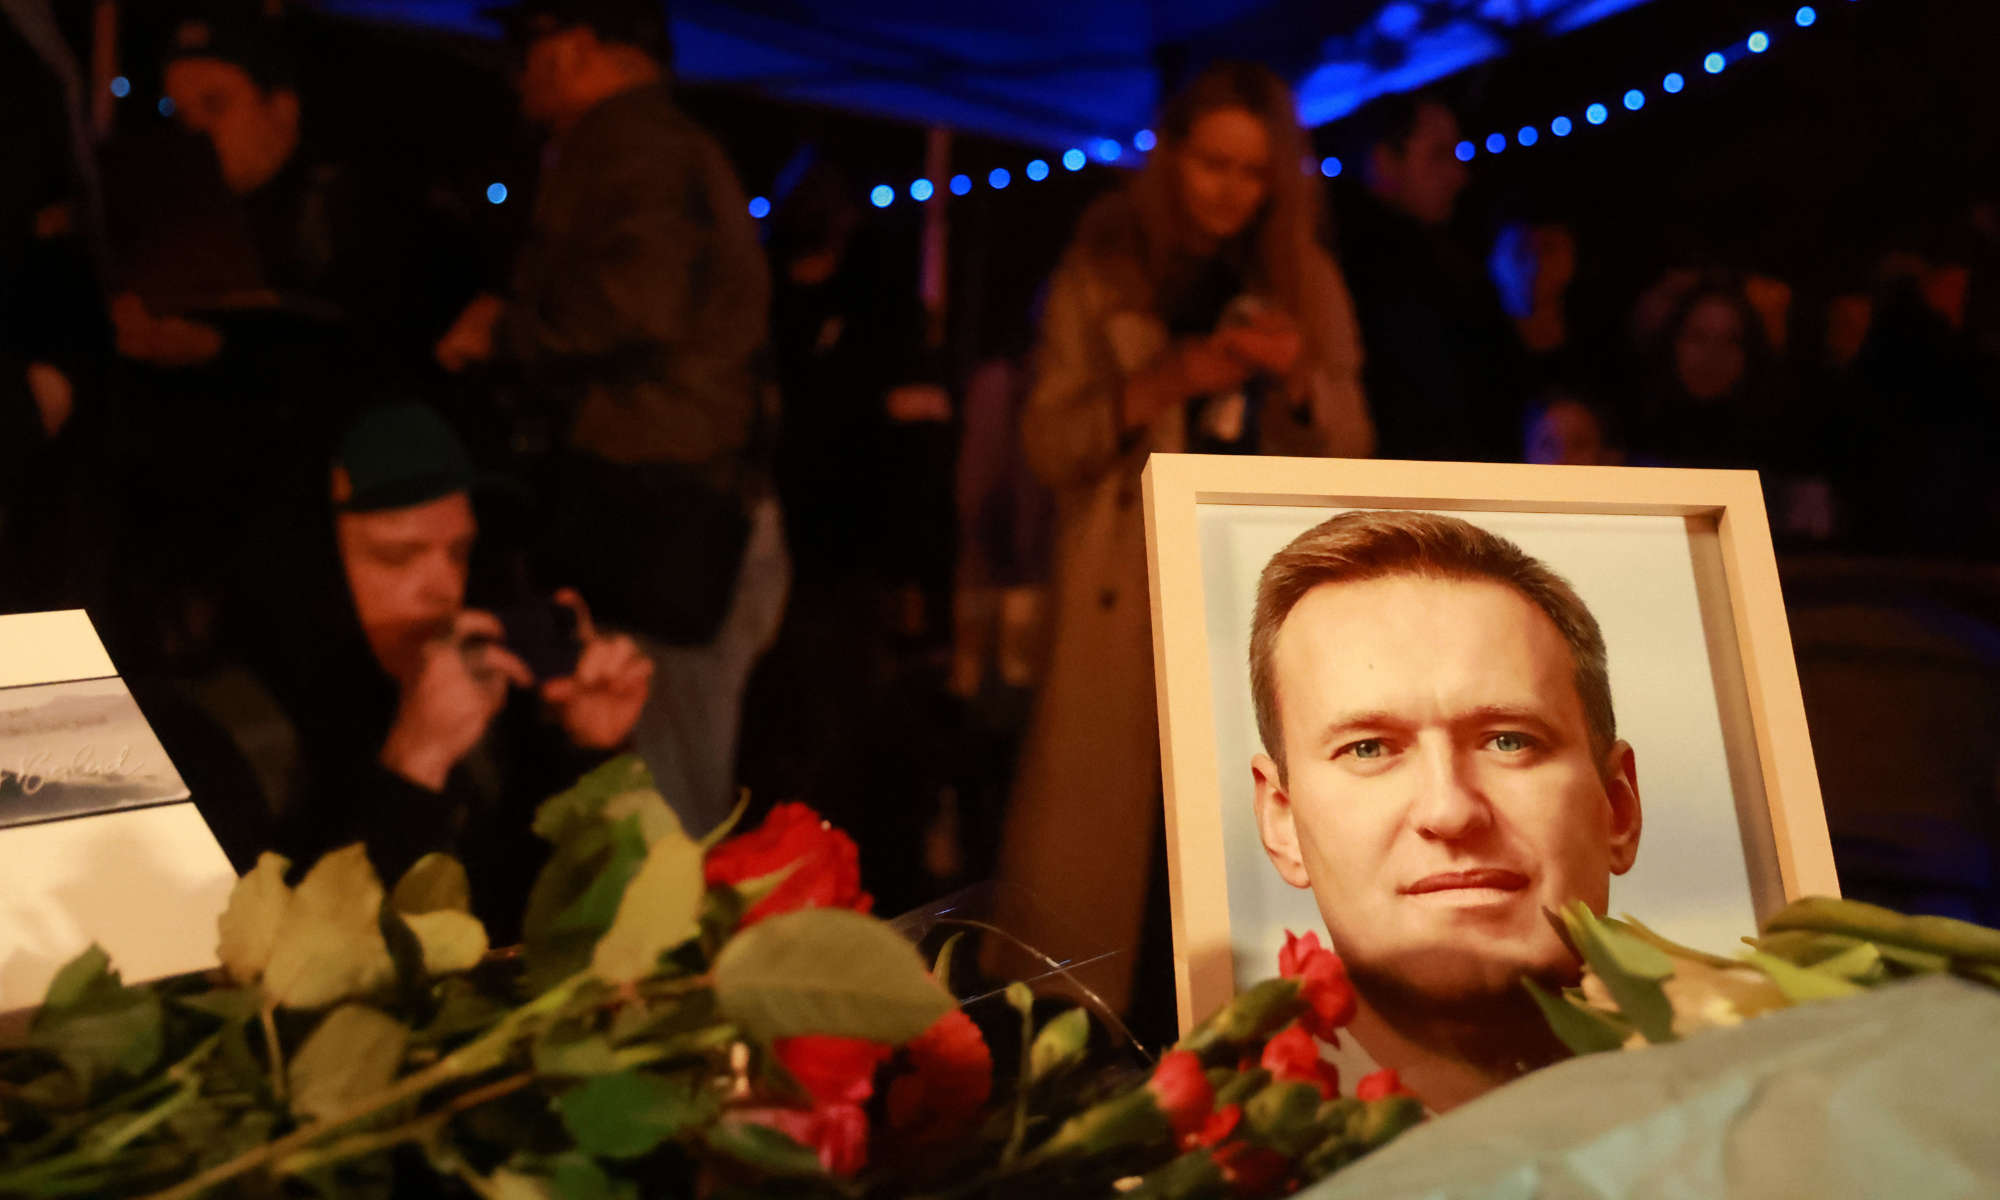 Close up of a framed photo of Alexei Navalny, who led one of the recent opposition movements against Vladimir Putin, surrounded by flowers during a nighttime vigil after reports of his death.